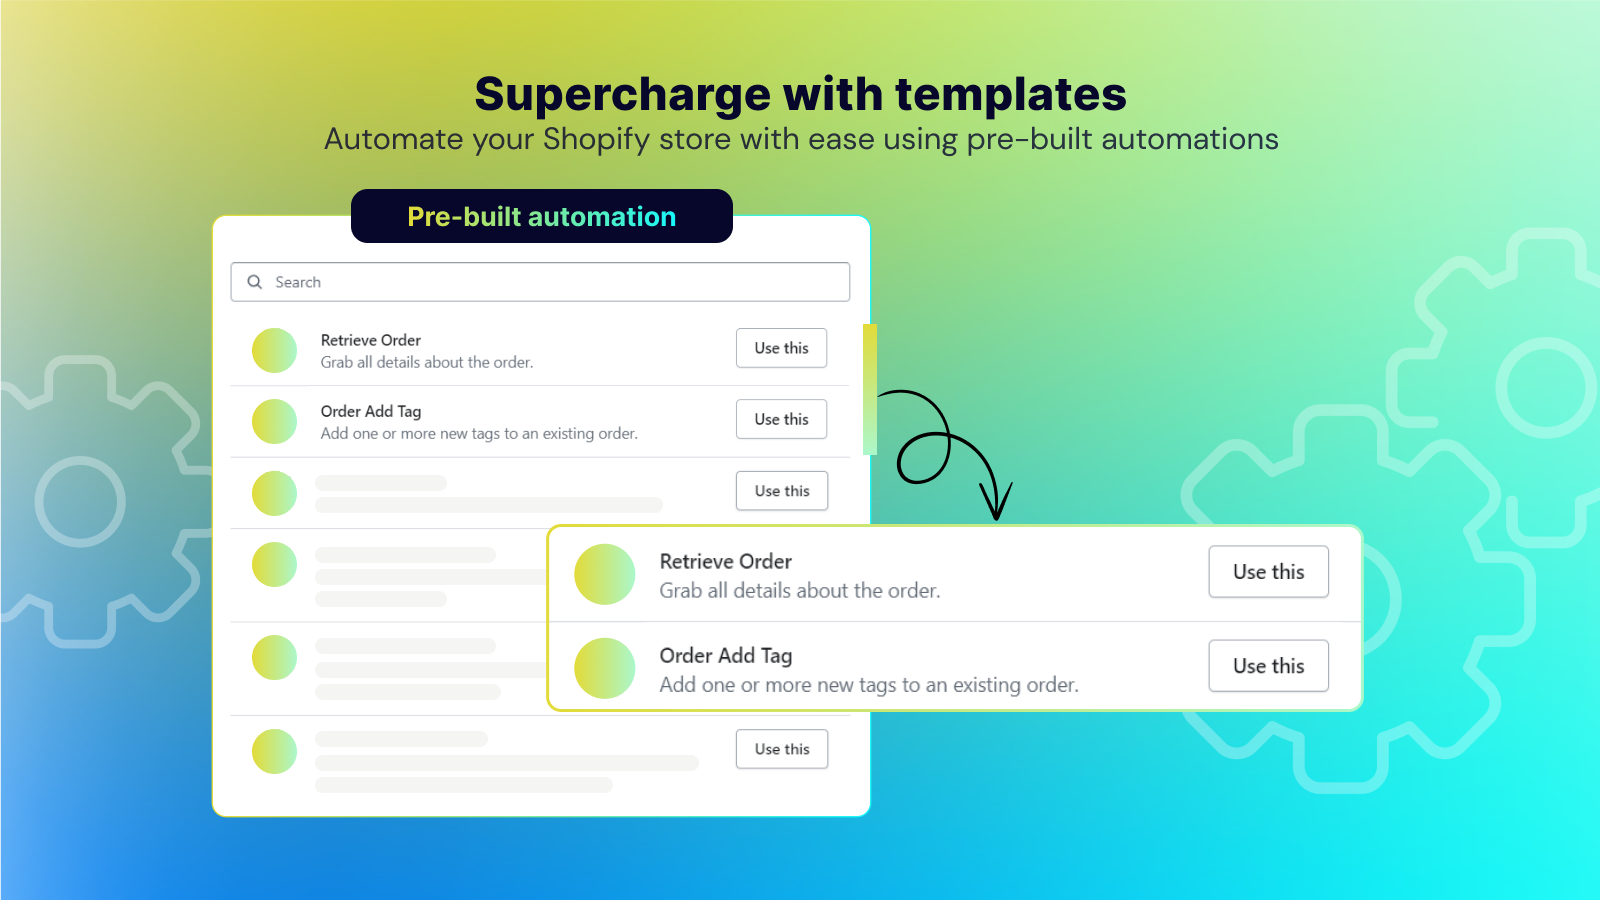 Supercharge with templates